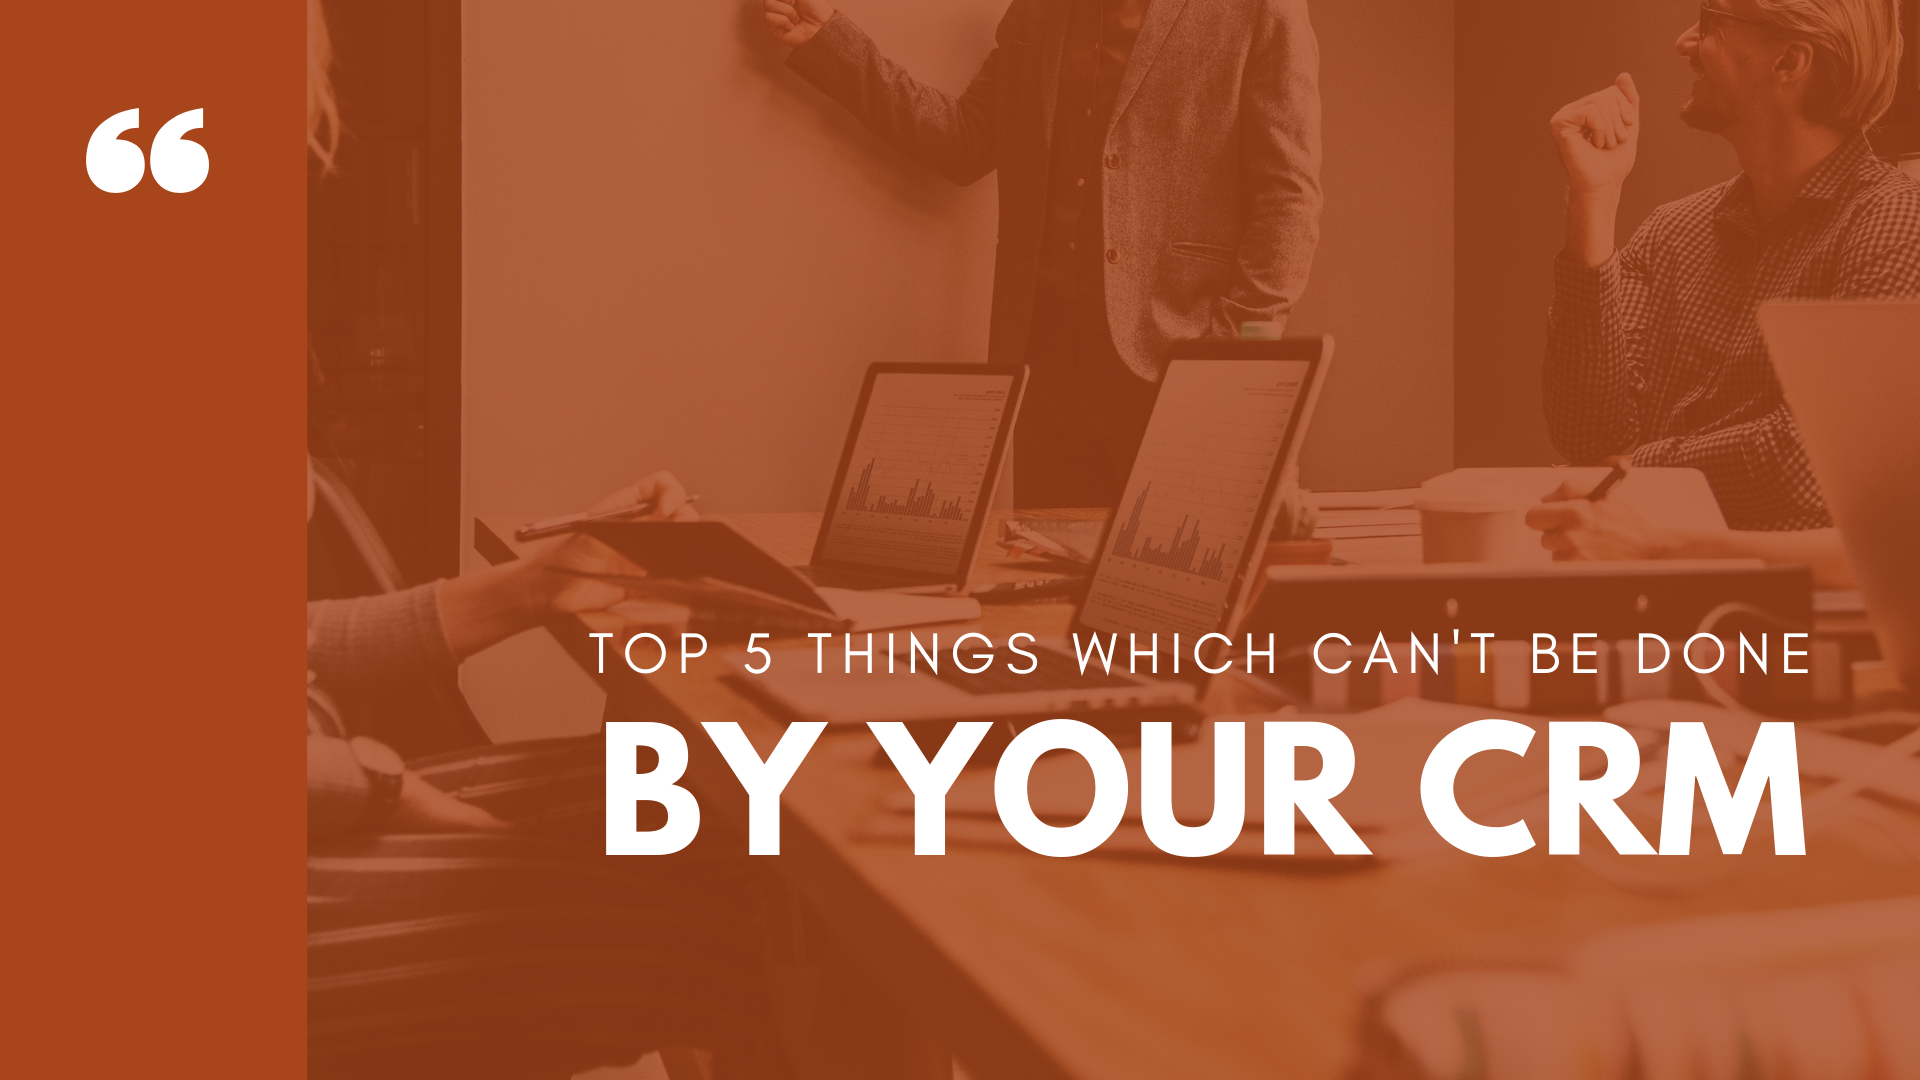 Top 5 things which can't be done by your CRM